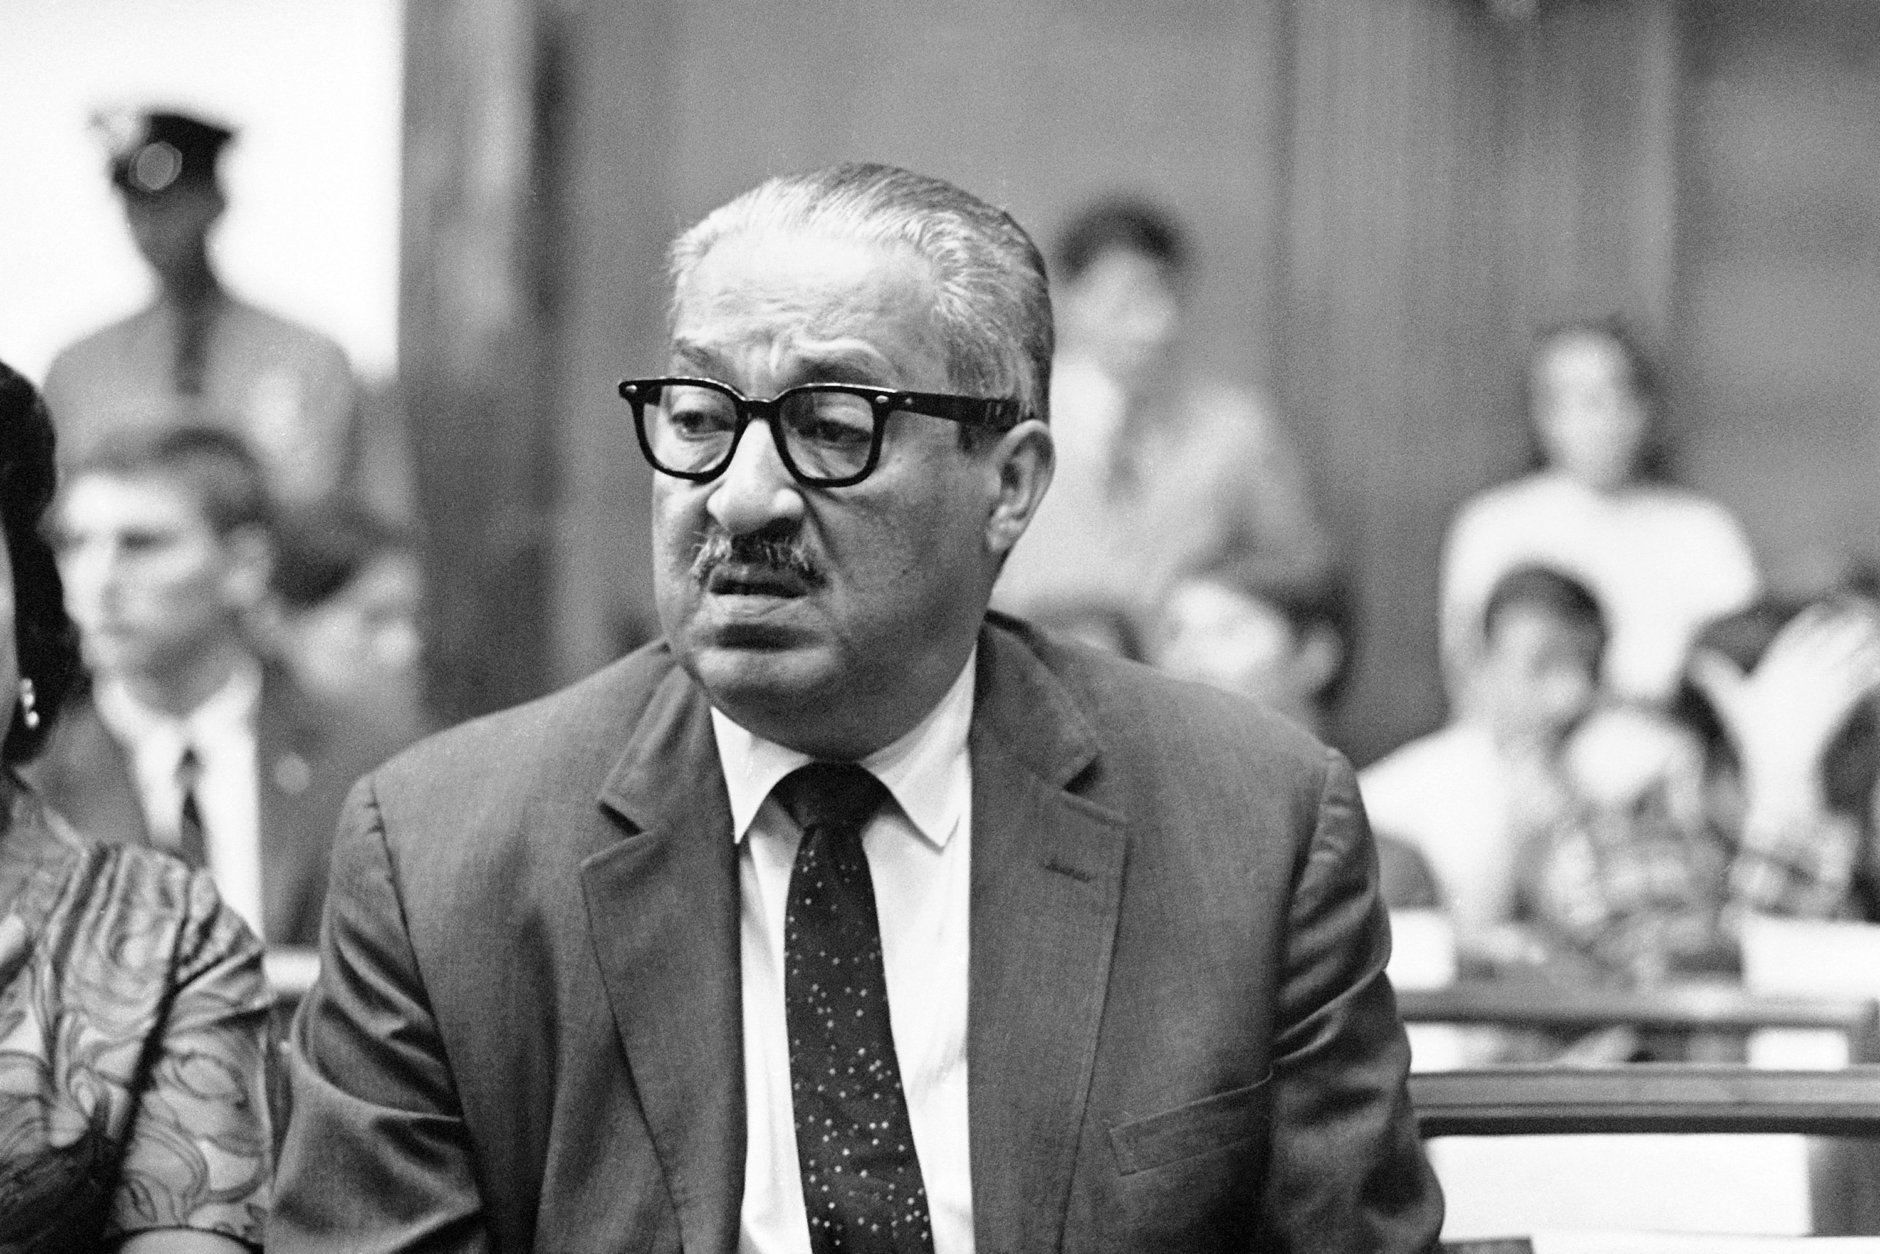 Thurgood Marshall, solicitor general of the U.S., is seen at a Senate hearing on his fitness to be appointed to the U.S. Supreme Court, July 19, 1967, in Washington.  (AP Photo/John Rous)